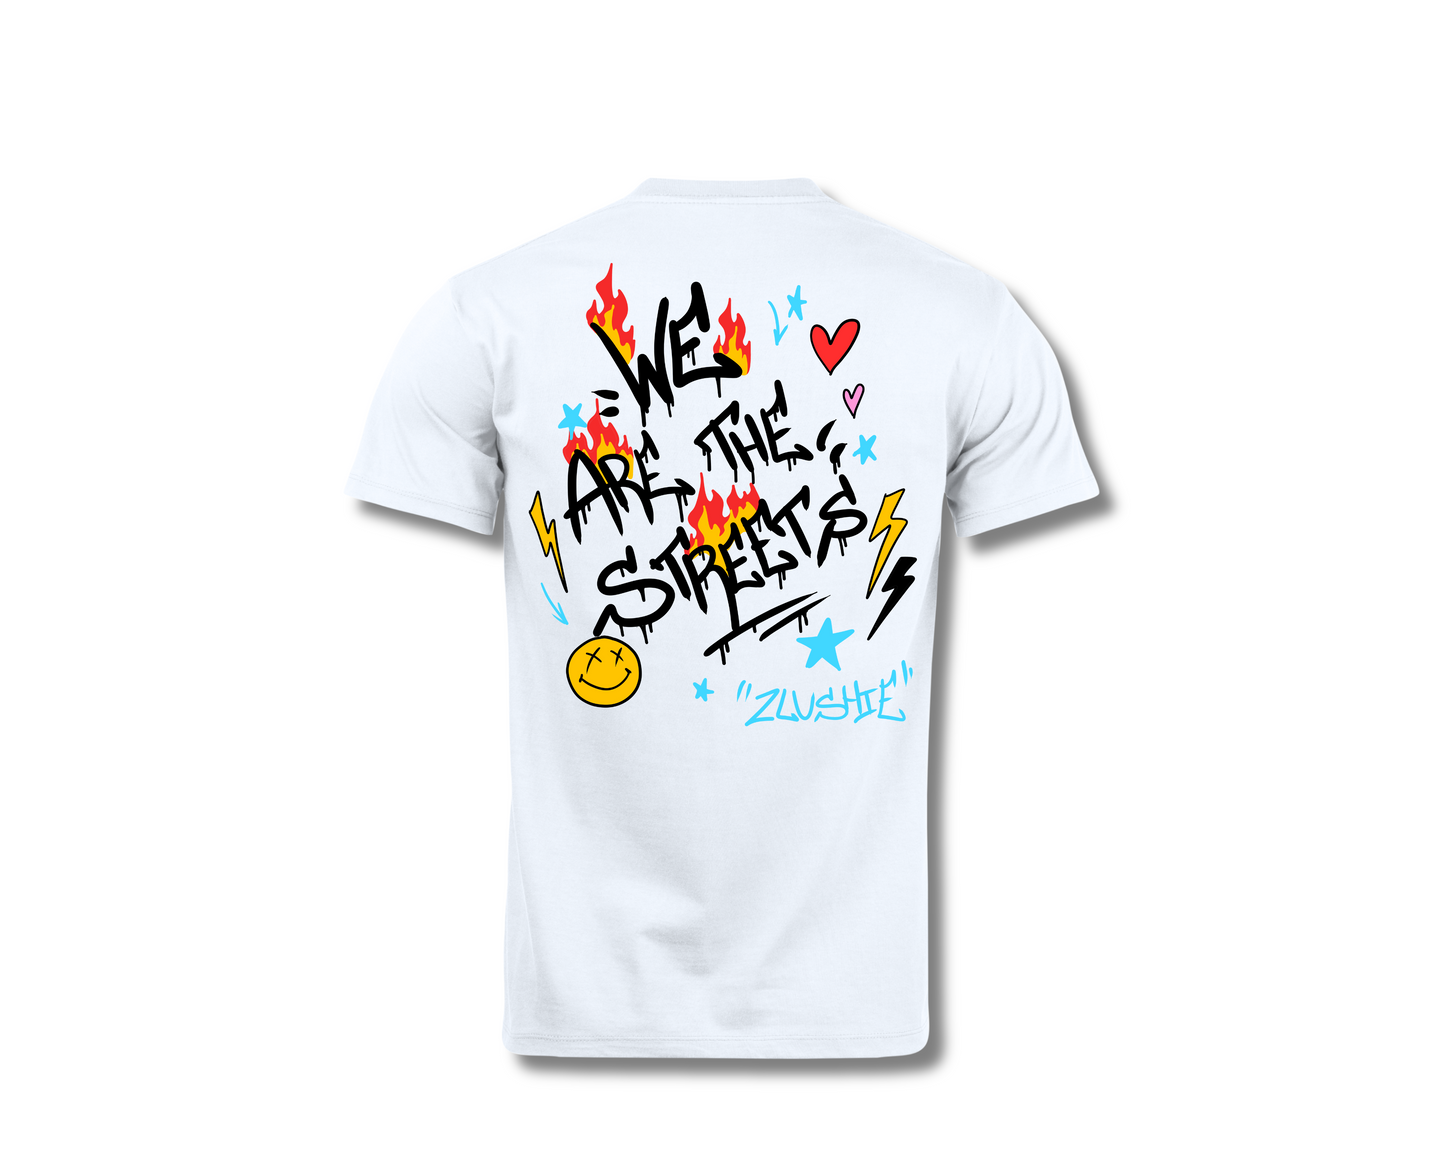 Zlushie "We are the Street" T-Shirt